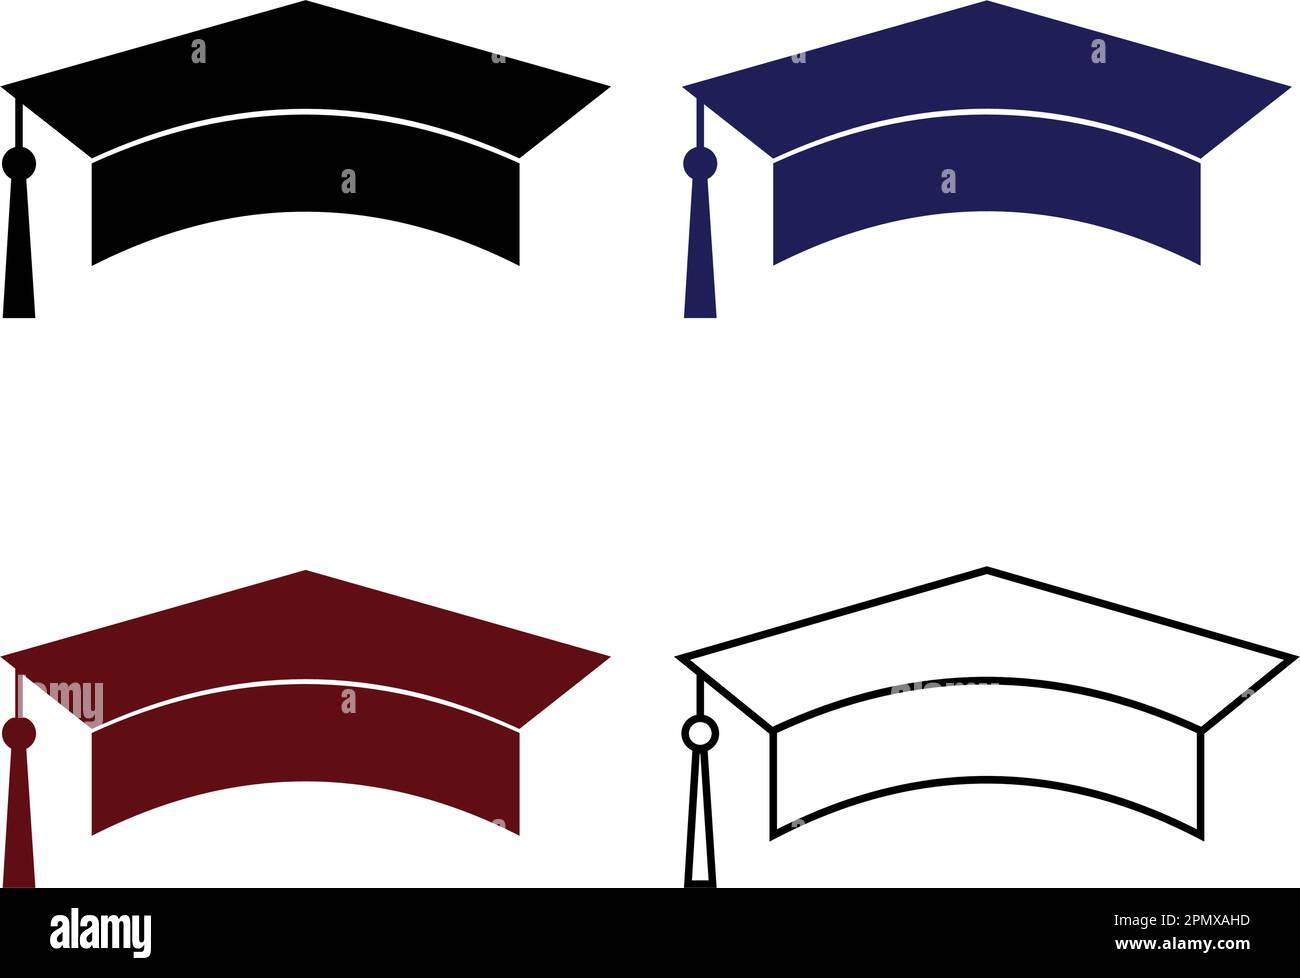 Set of graduation cap, student hat, bachelor cap icons, flat vector icon illustration. Black, blue, red symbol on white background. Stock Vector